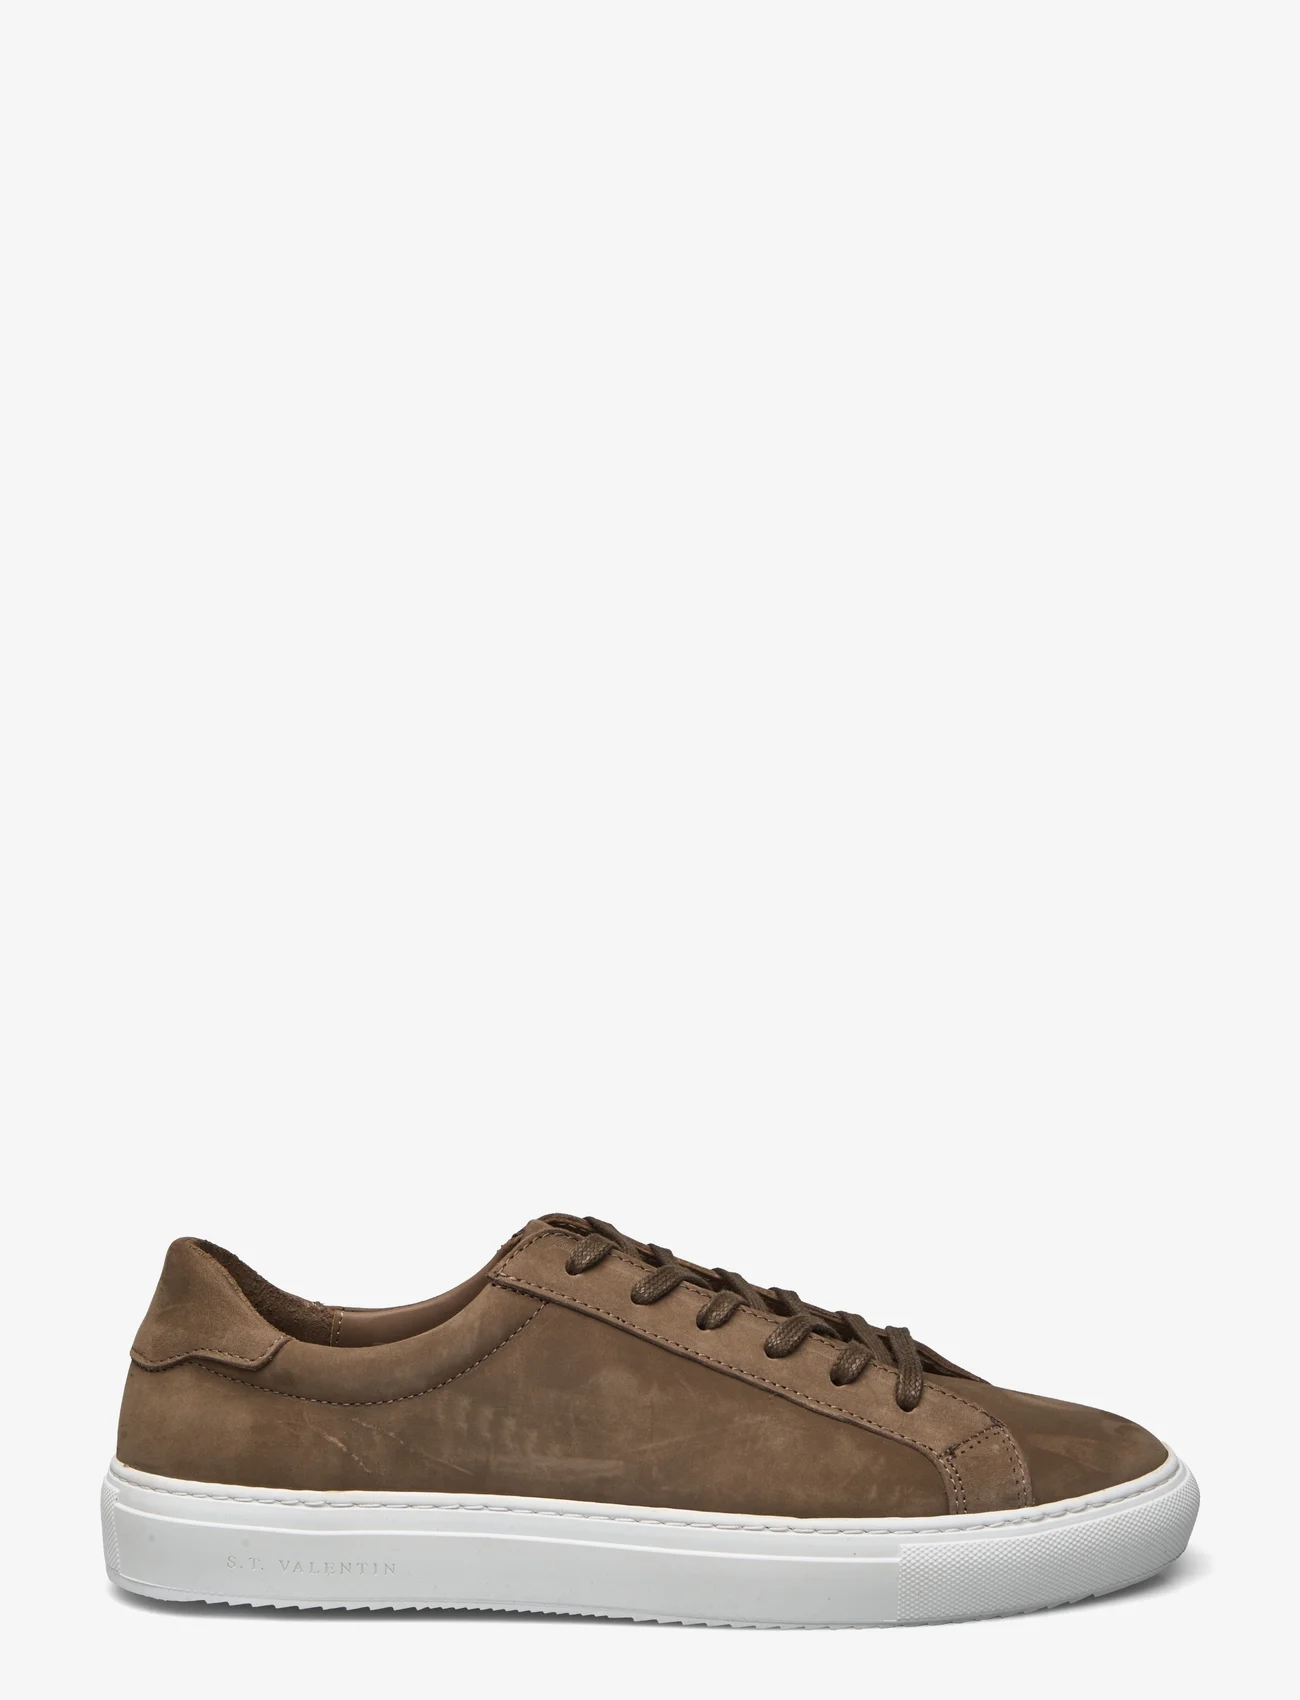 S.T. VALENTIN - Classic Sneaker -Grained leather - low tops - taupe - 1